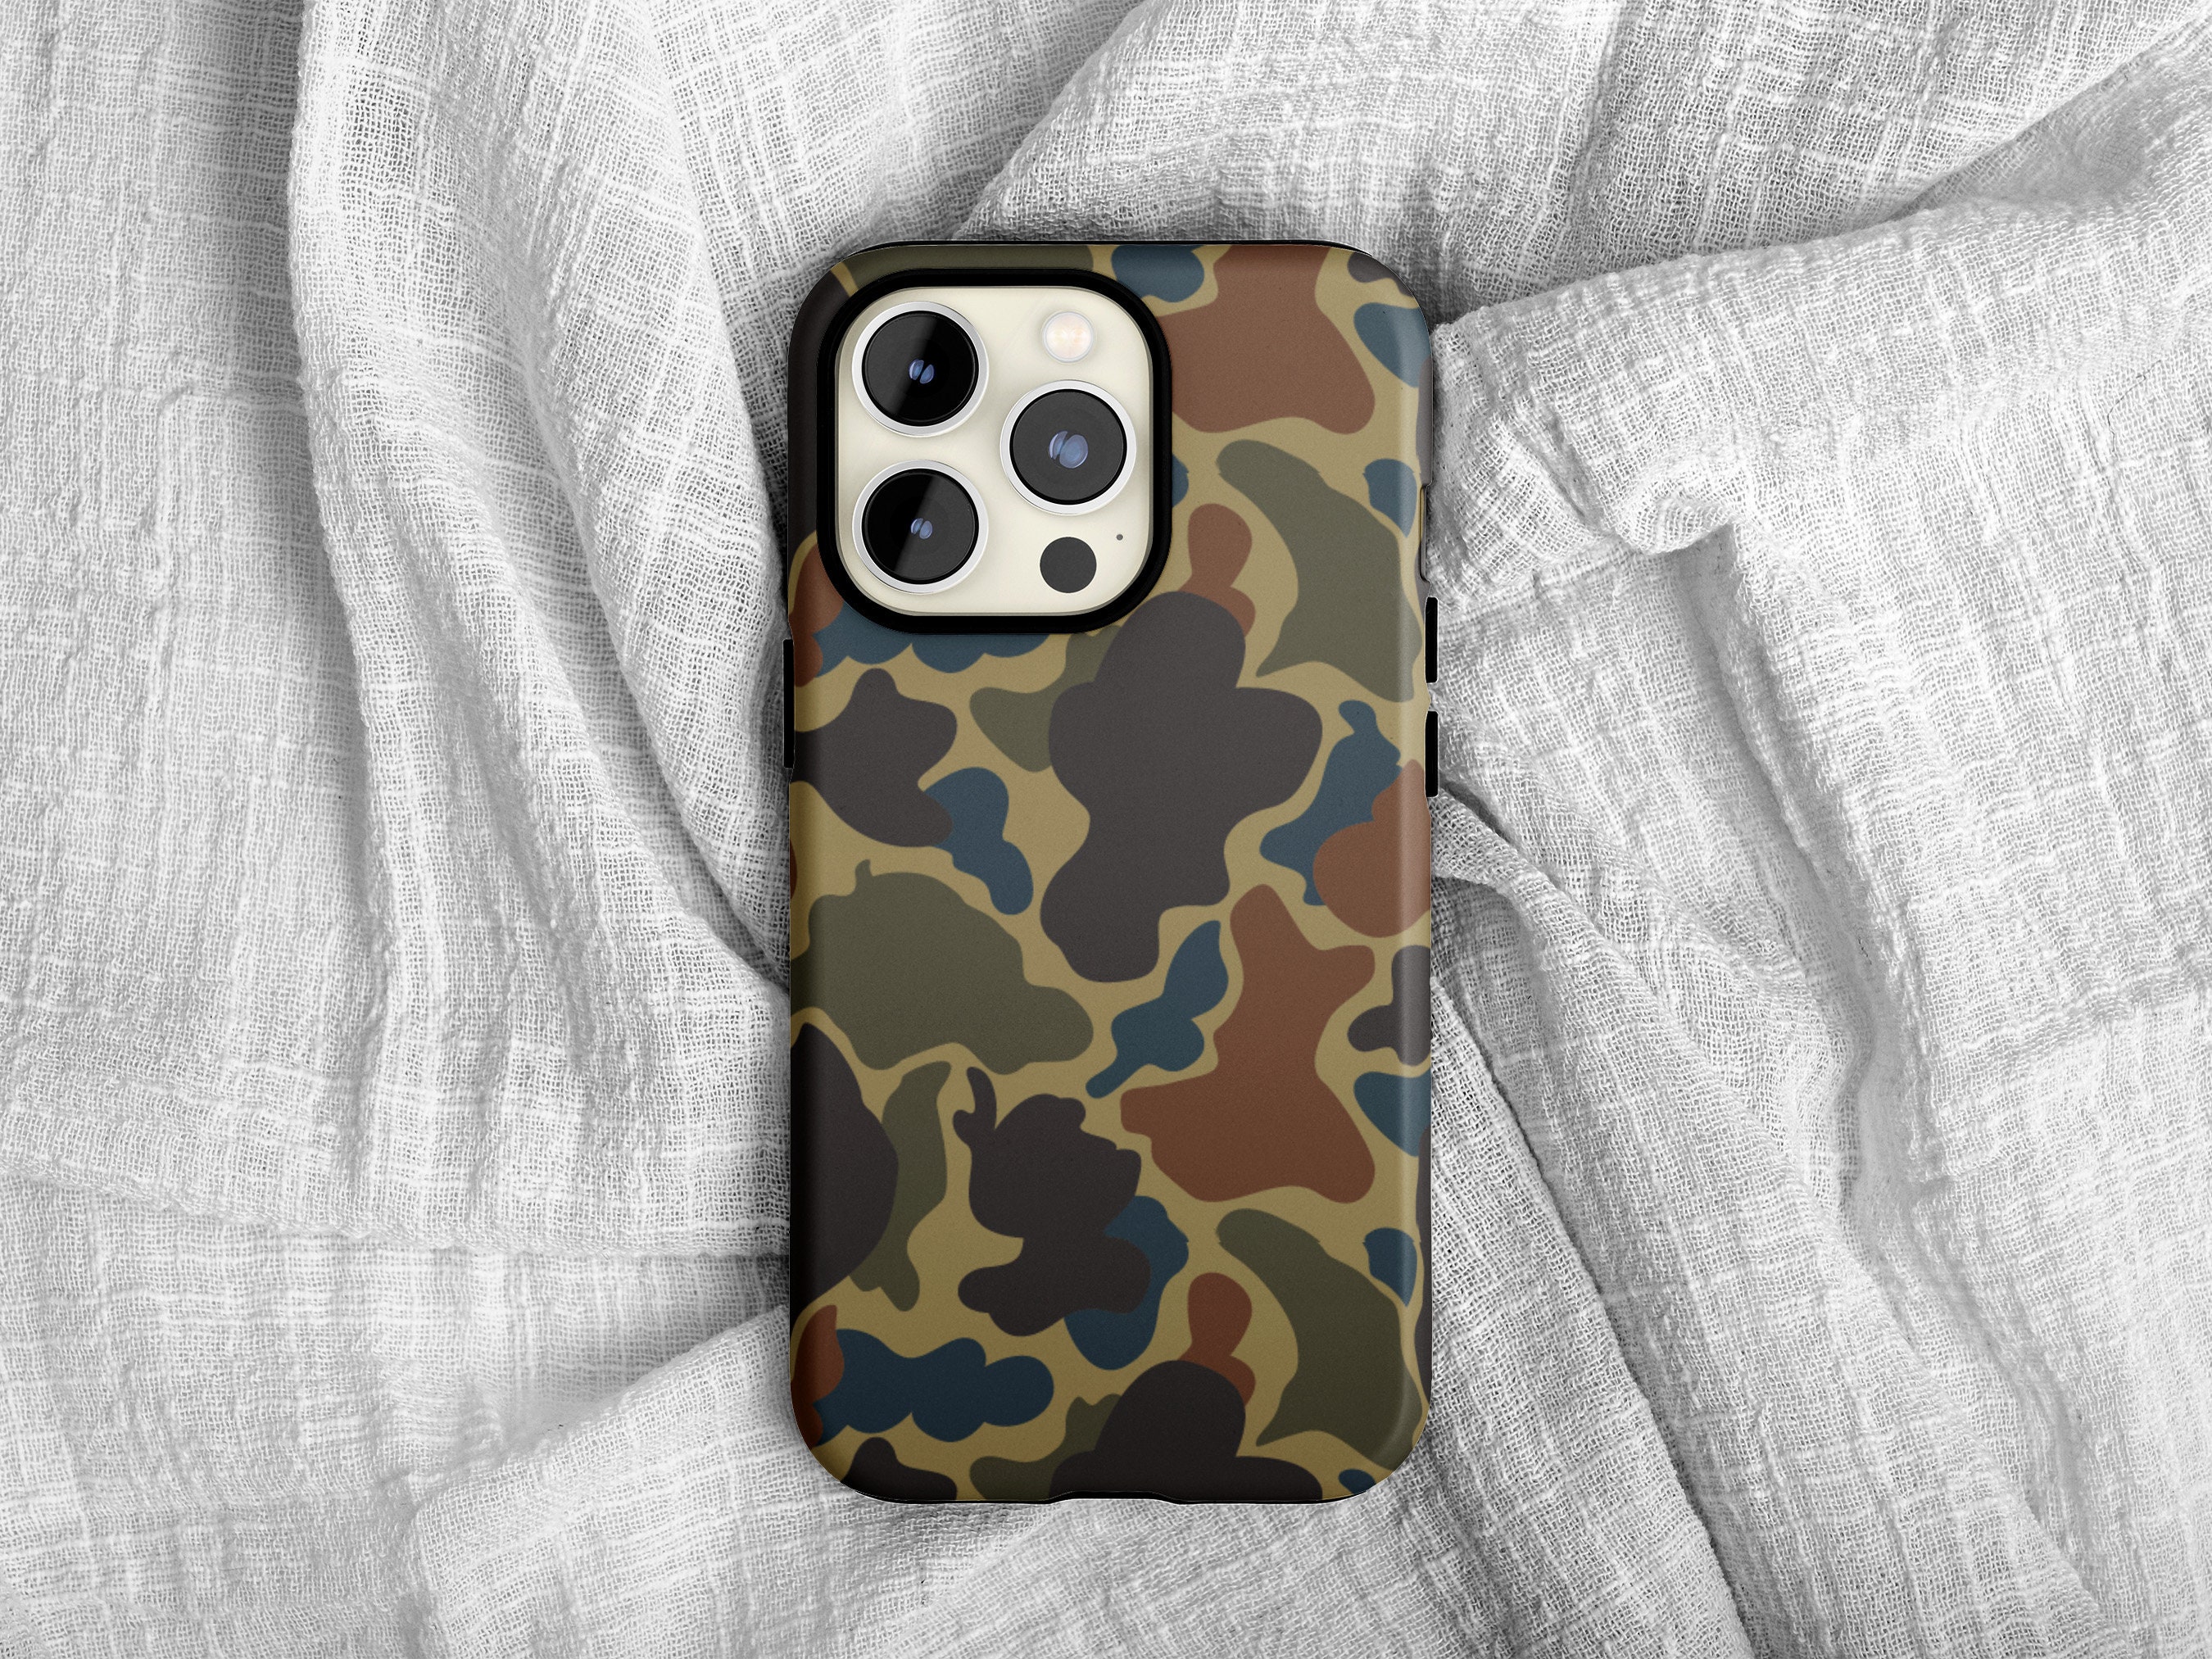  iPhone SE Case,Camouflage Tree Trunk and Skull Deer